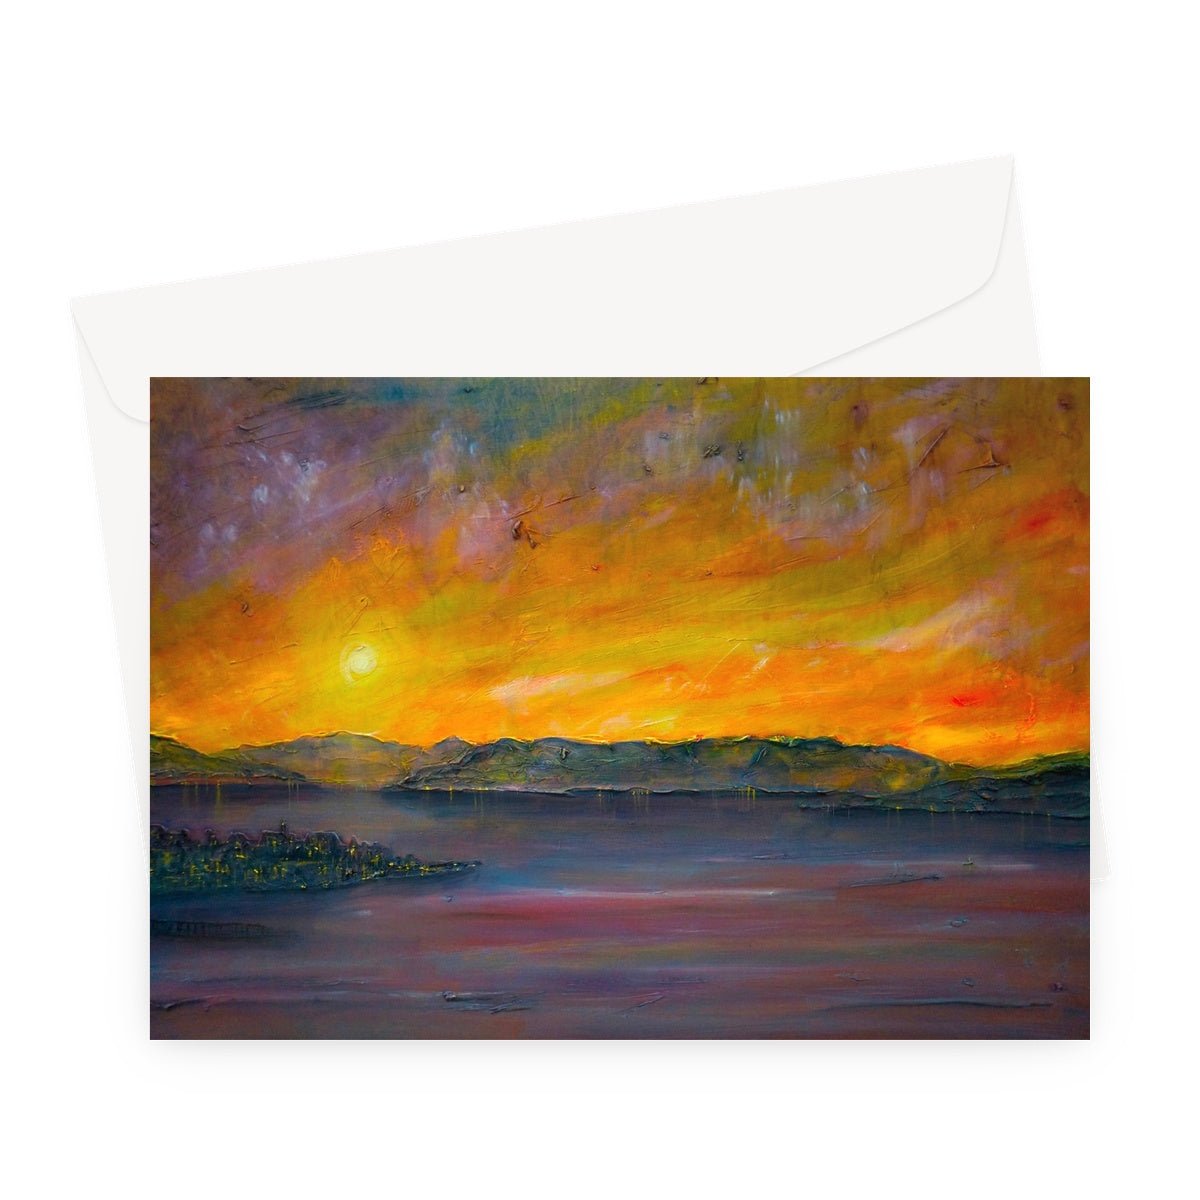 Sunset Over Gourock Art Gifts Greeting Card-Greetings Cards-River Clyde Art Gallery-A5 Landscape-10 Cards-Paintings, Prints, Homeware, Art Gifts From Scotland By Scottish Artist Kevin Hunter